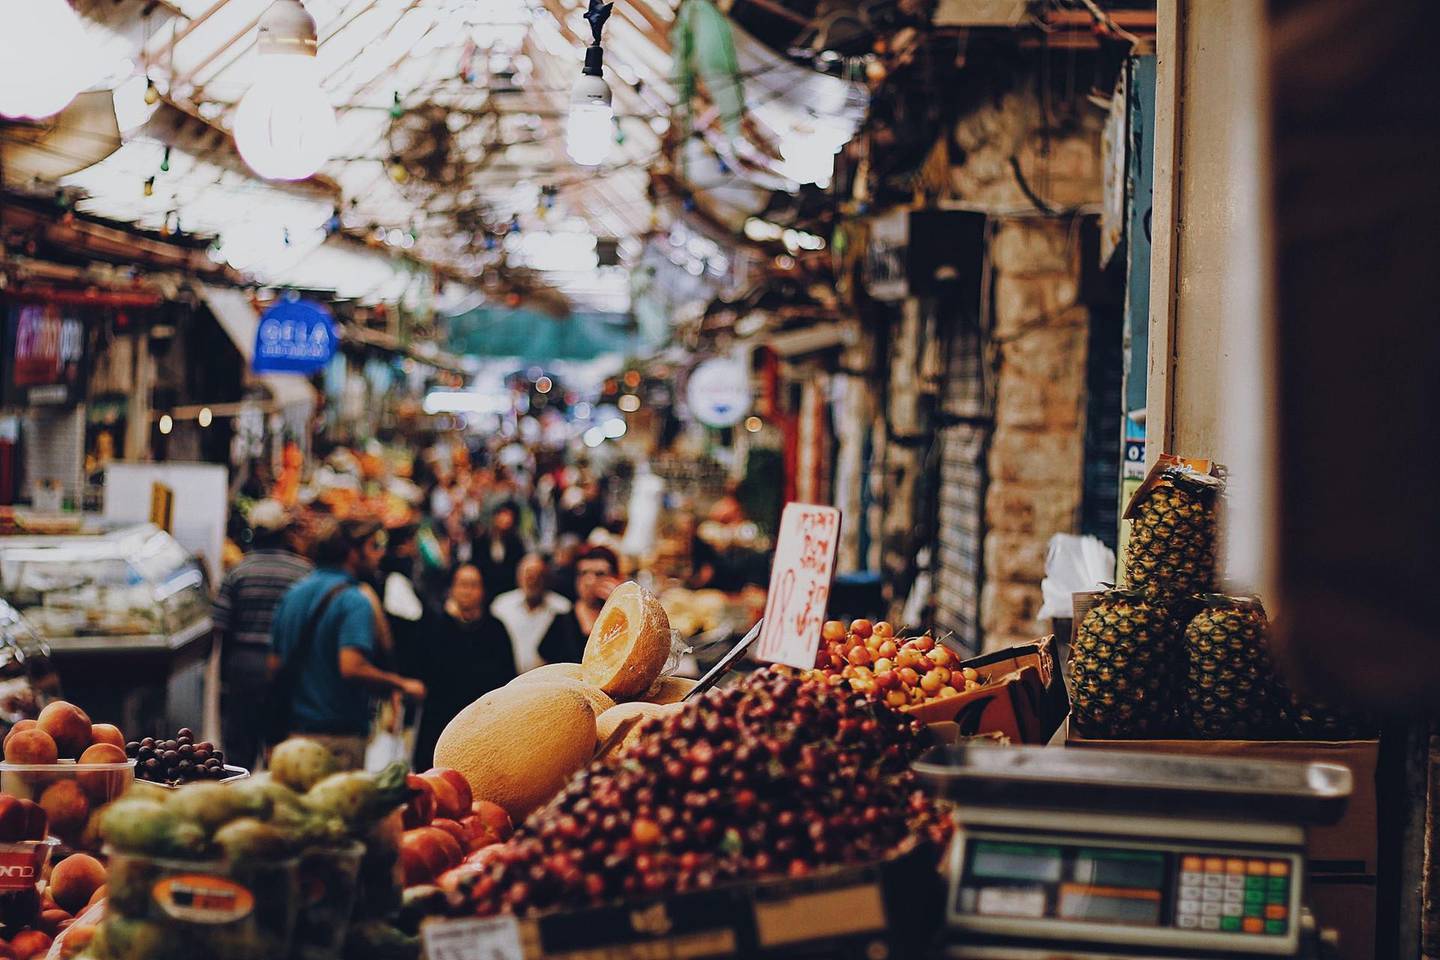 Israel is famed for its coastlines, history, culture and varied culinary offerings. Unsplash